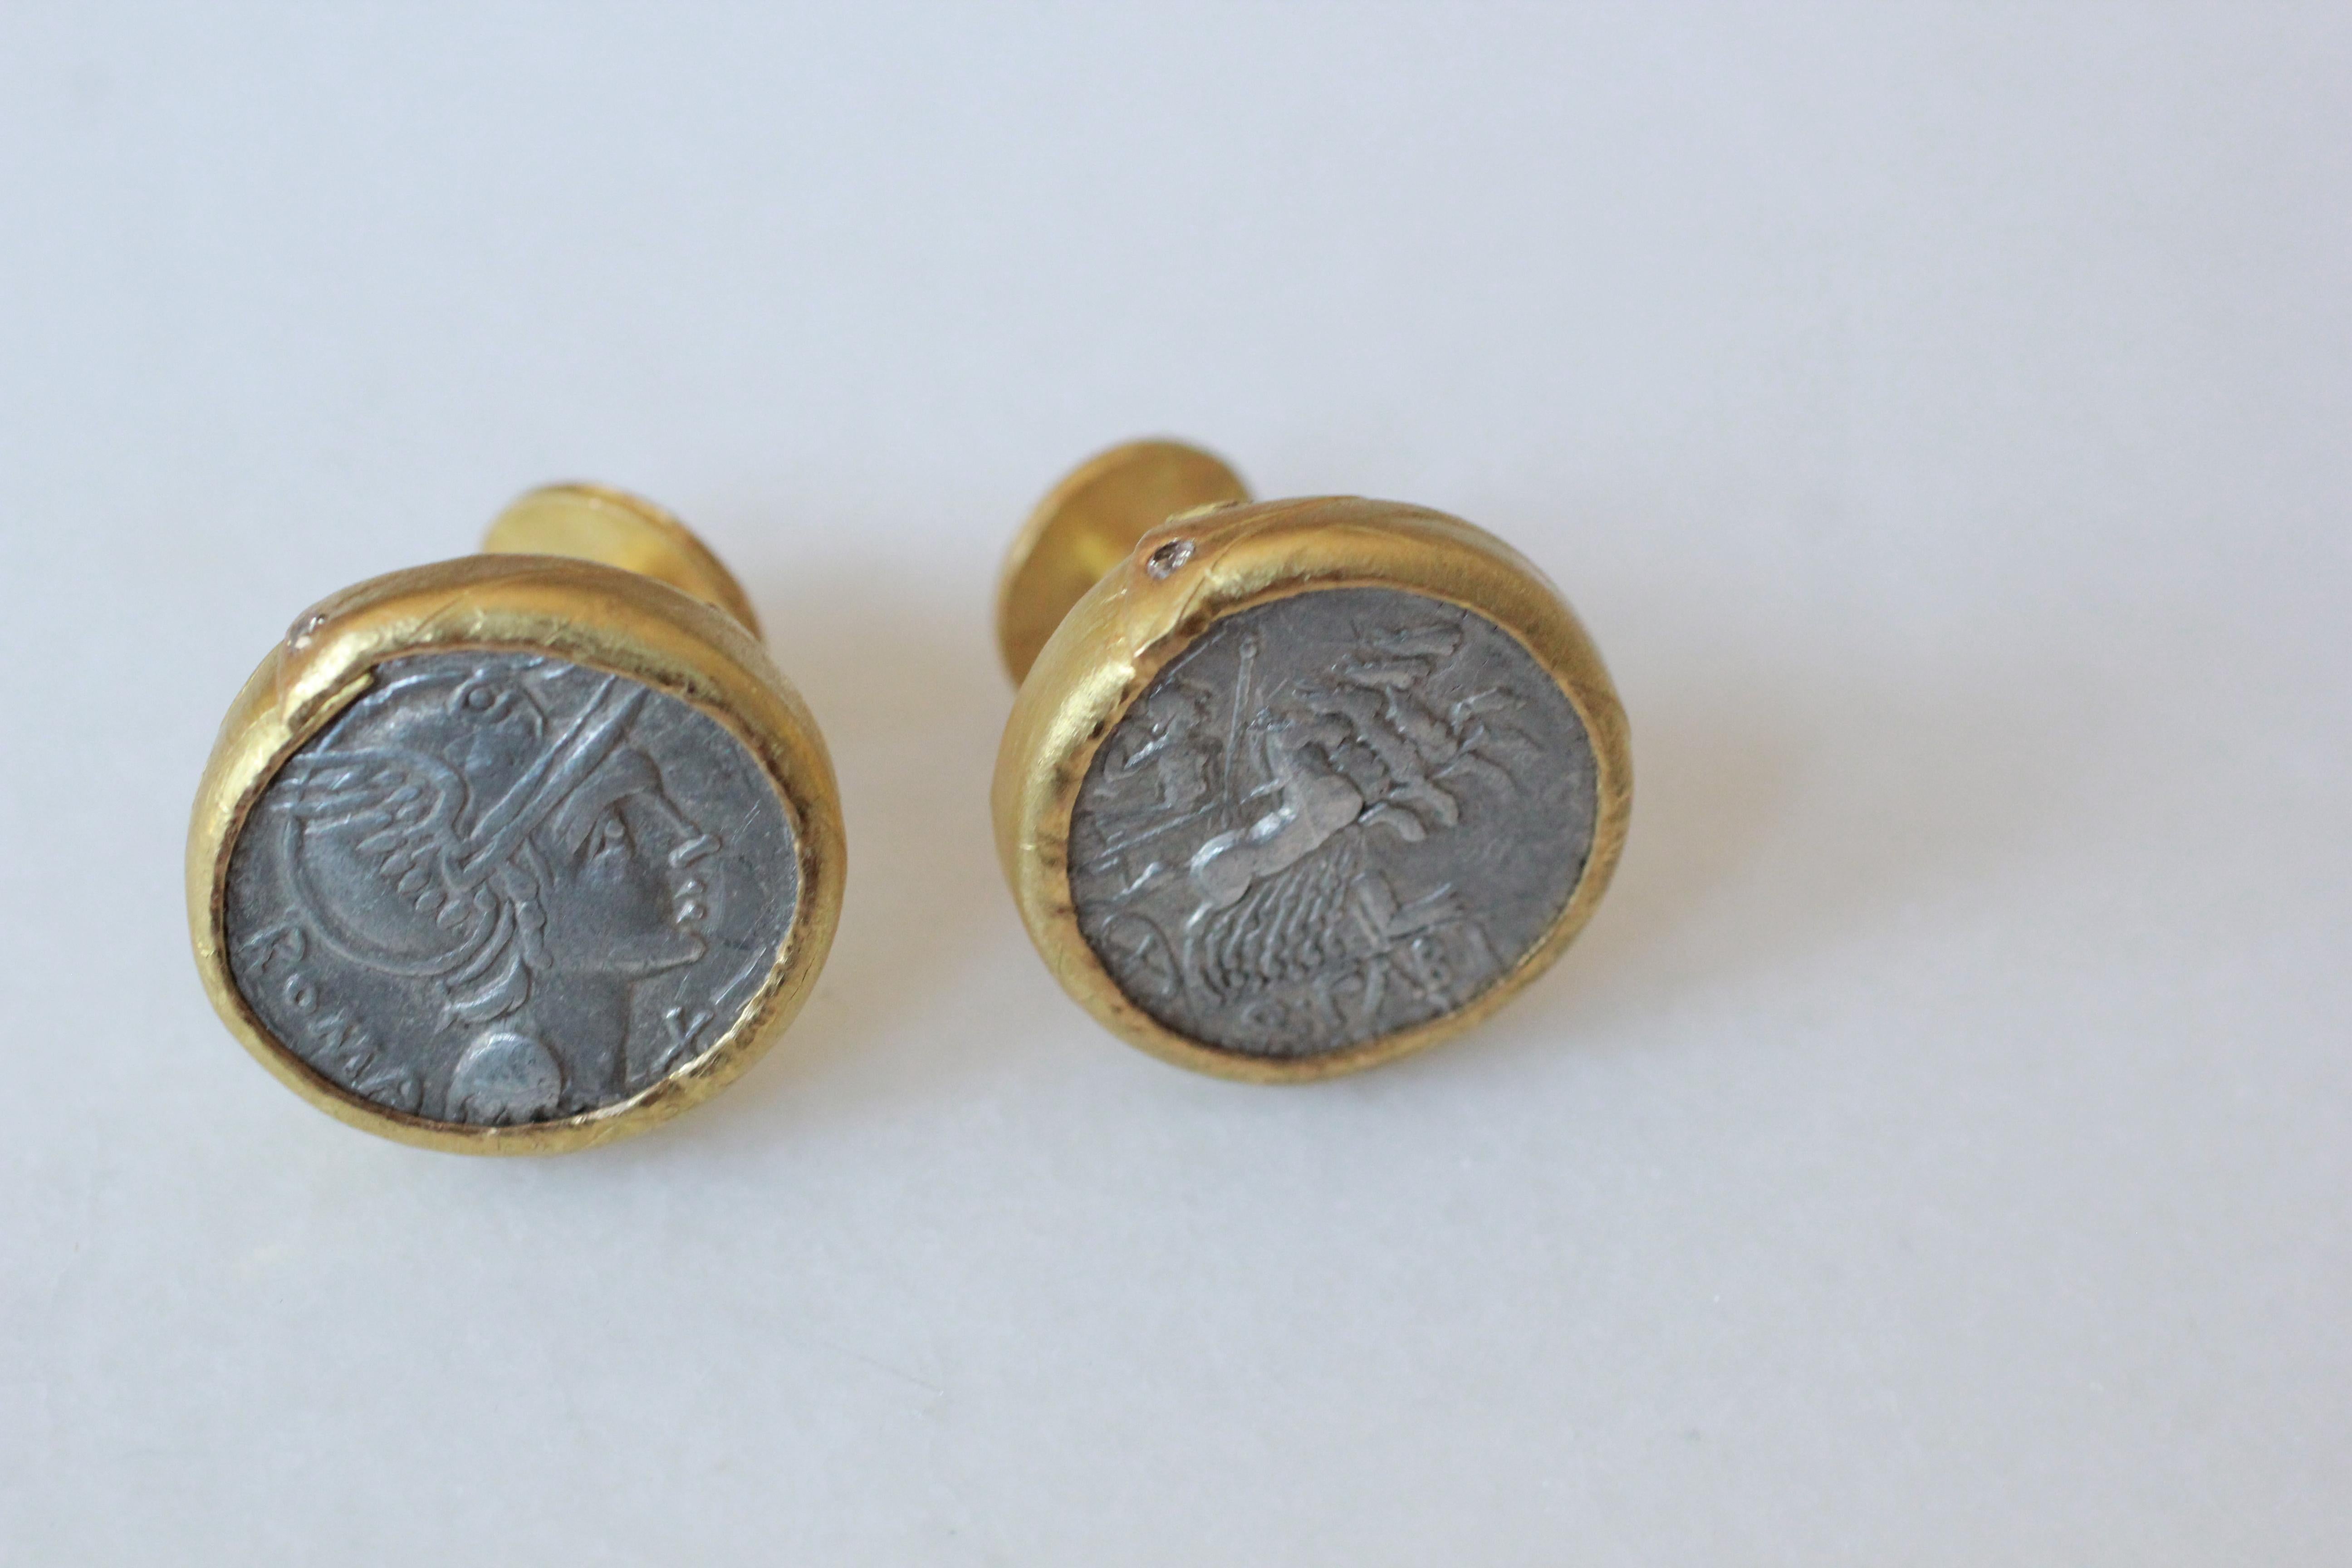 Coin cufflinks. Antique 2nd Cent BC Roman coins set in 21k gold bezels, styled with small diamond accents. Contemporary jewelry design by AB Jewelry NYC.

Bold and masculine While inspired by history, these elegant cufflinks are created today for a